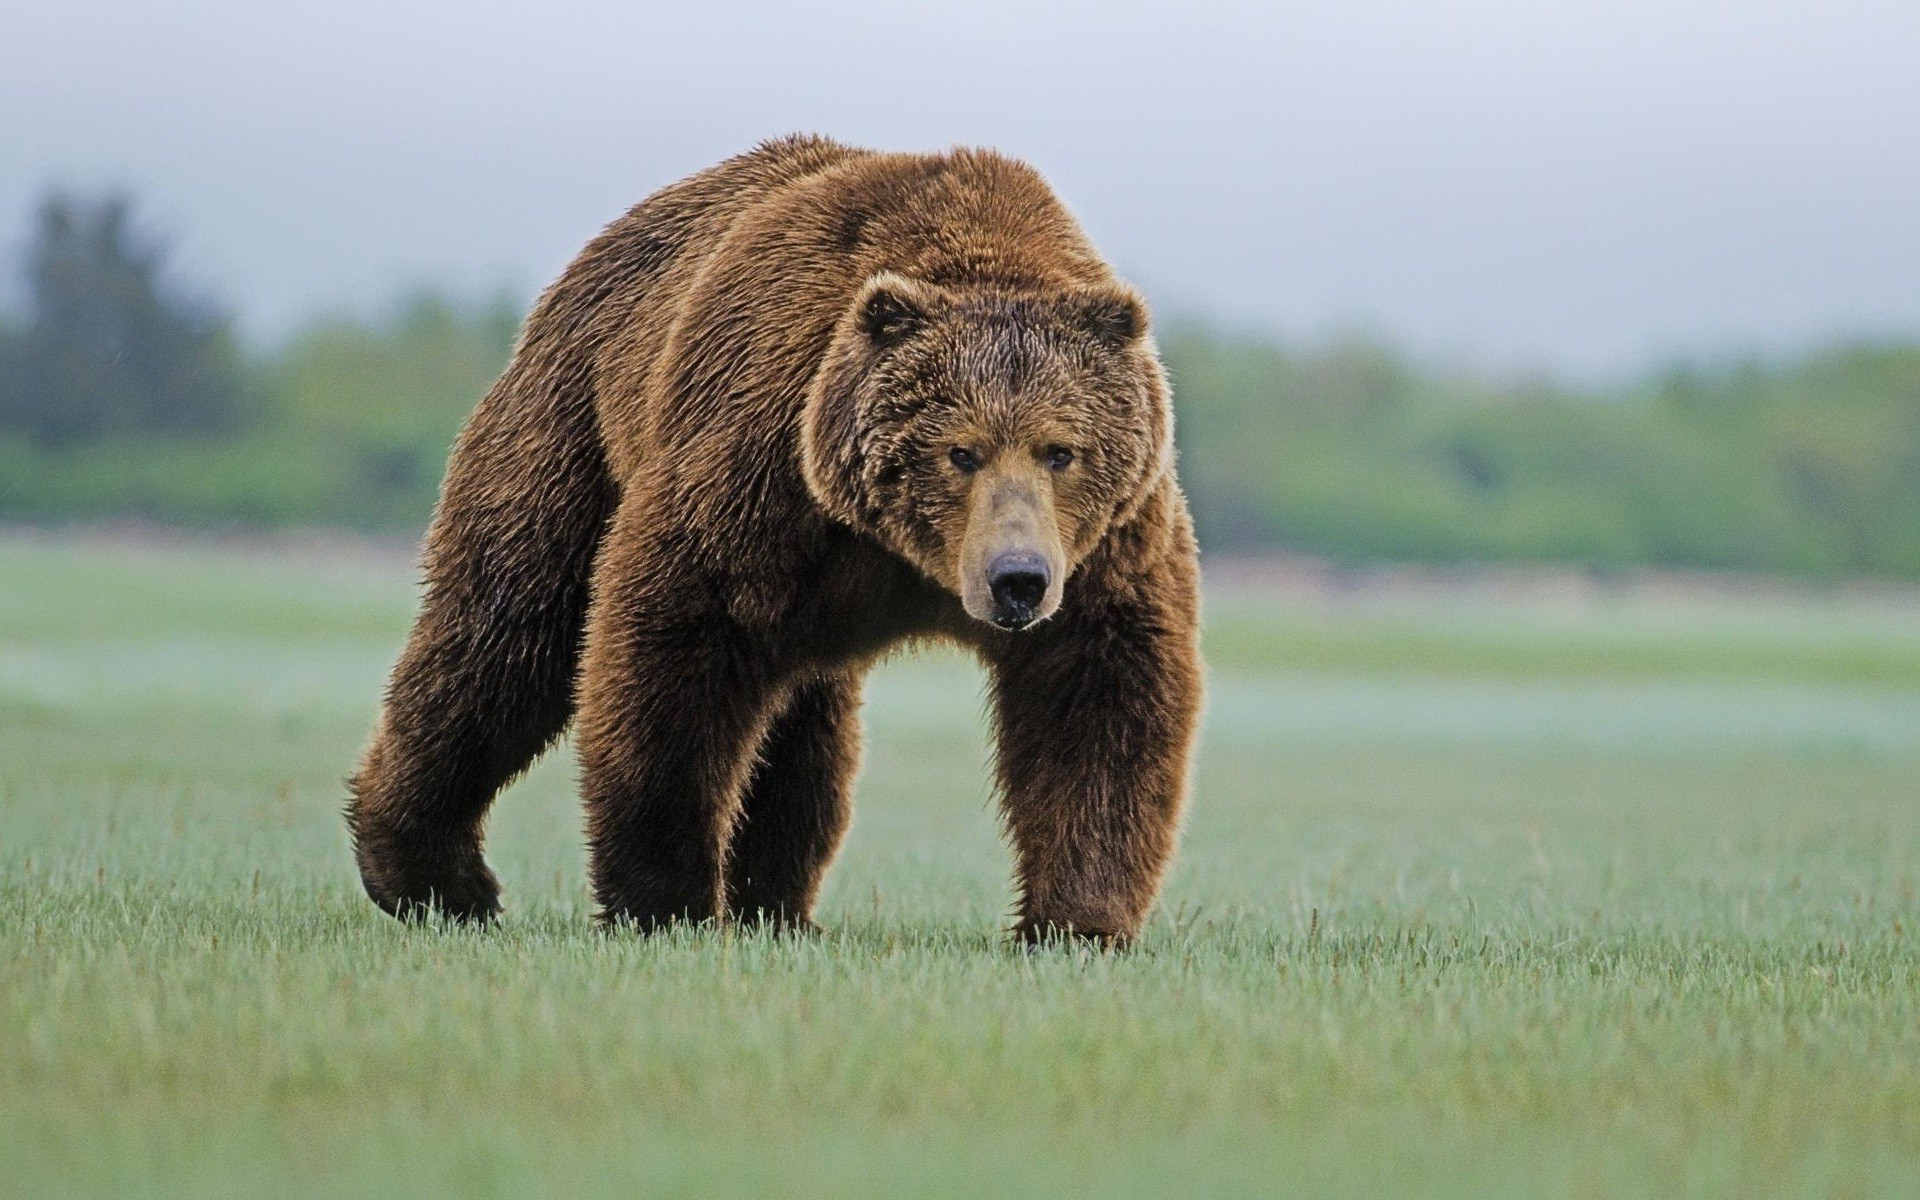 bears, Nature, Animals, Grizzly Bear, Grizzly Bears Wallpaper